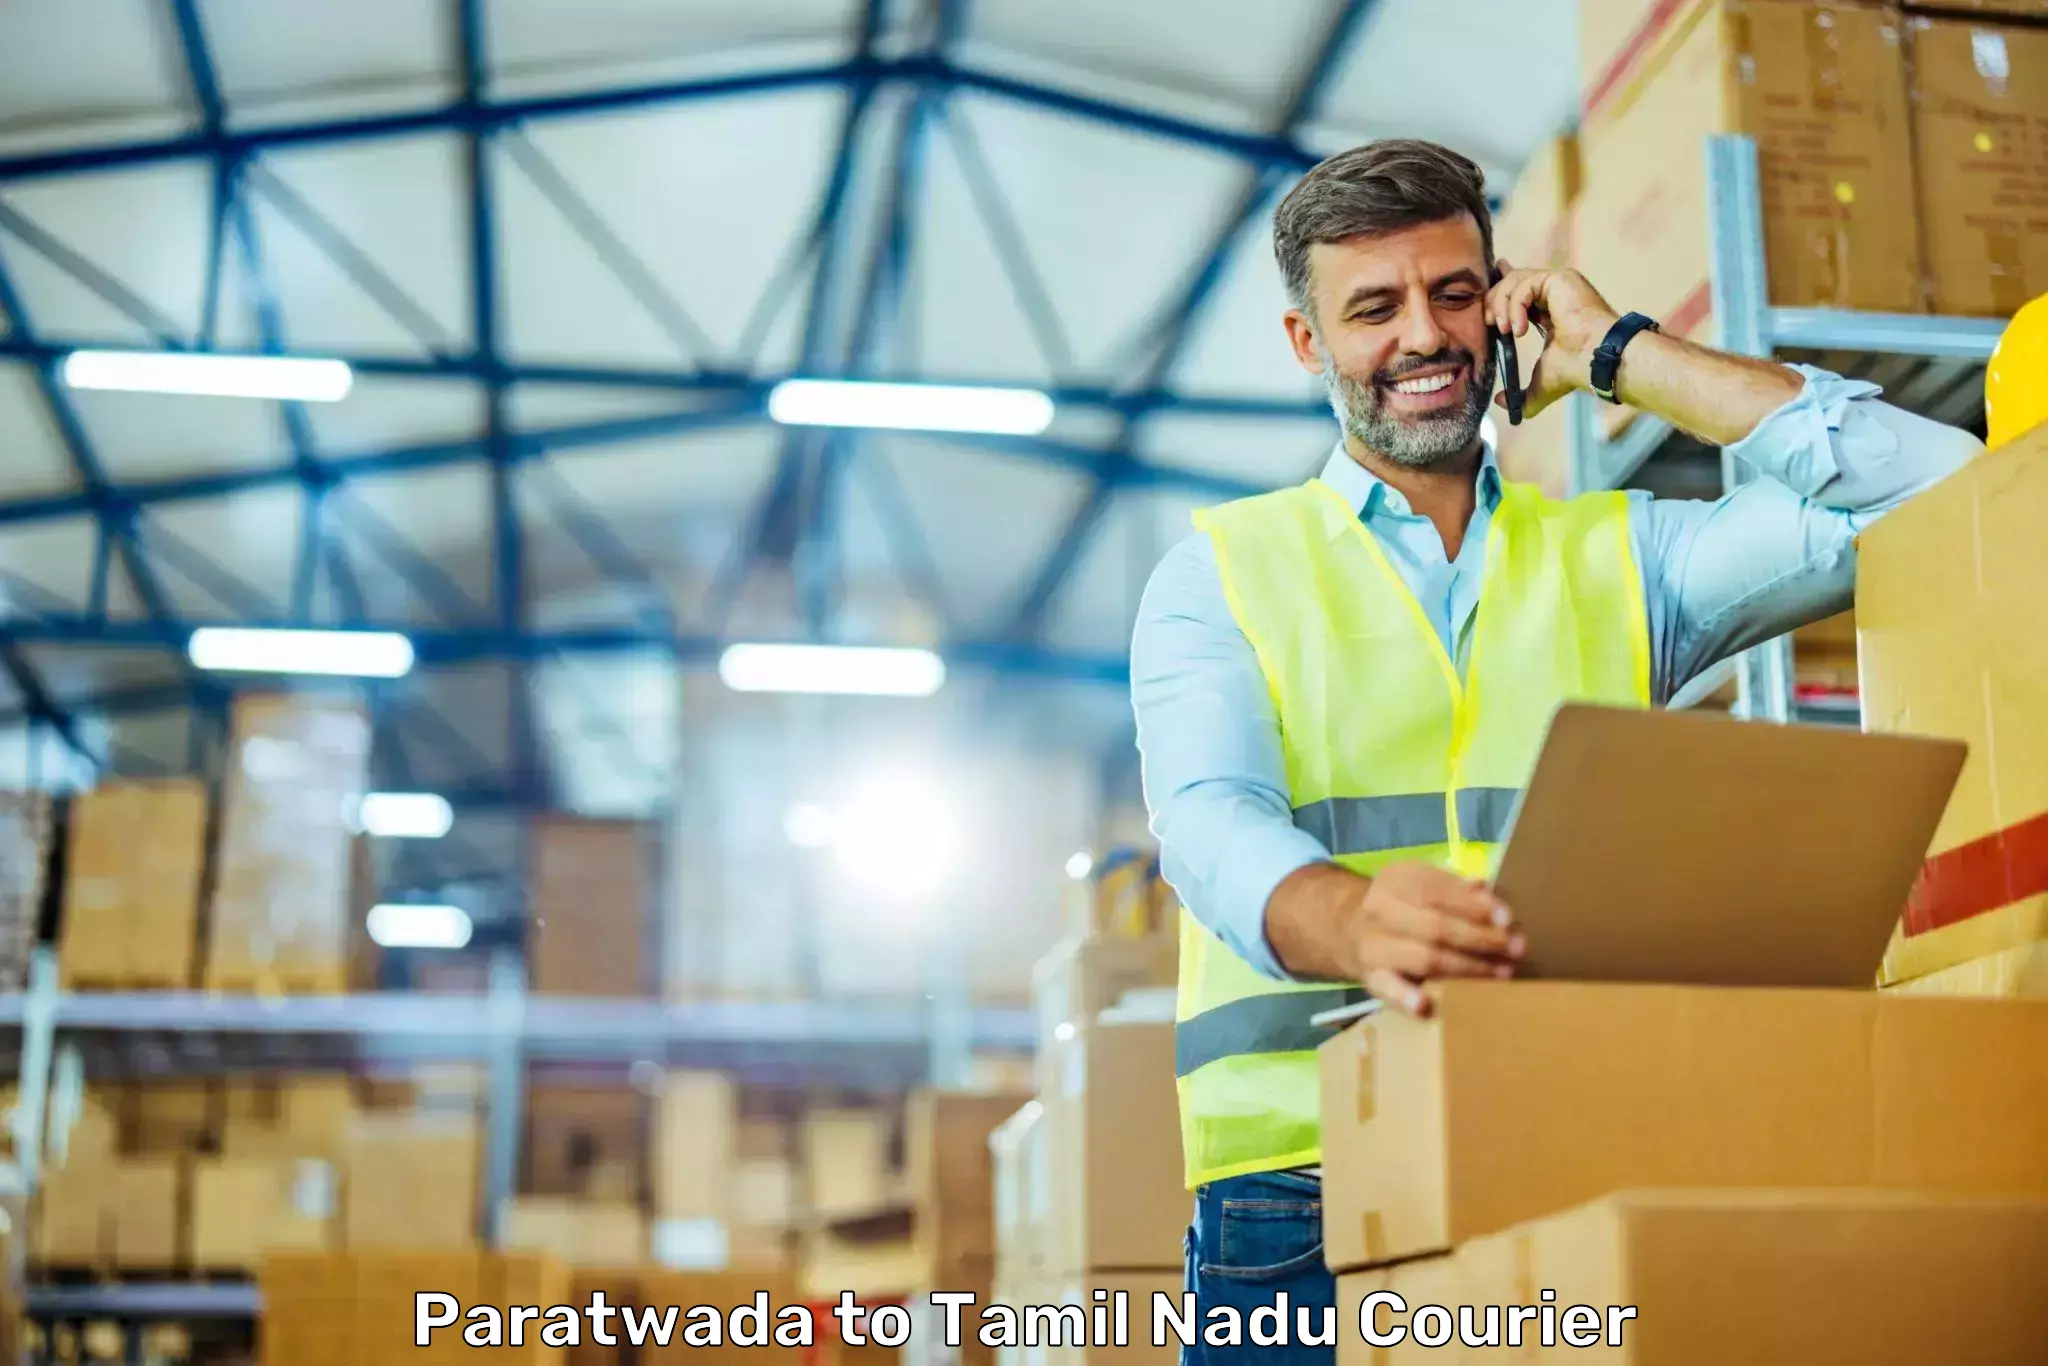 Global shipping networks Paratwada to Velur